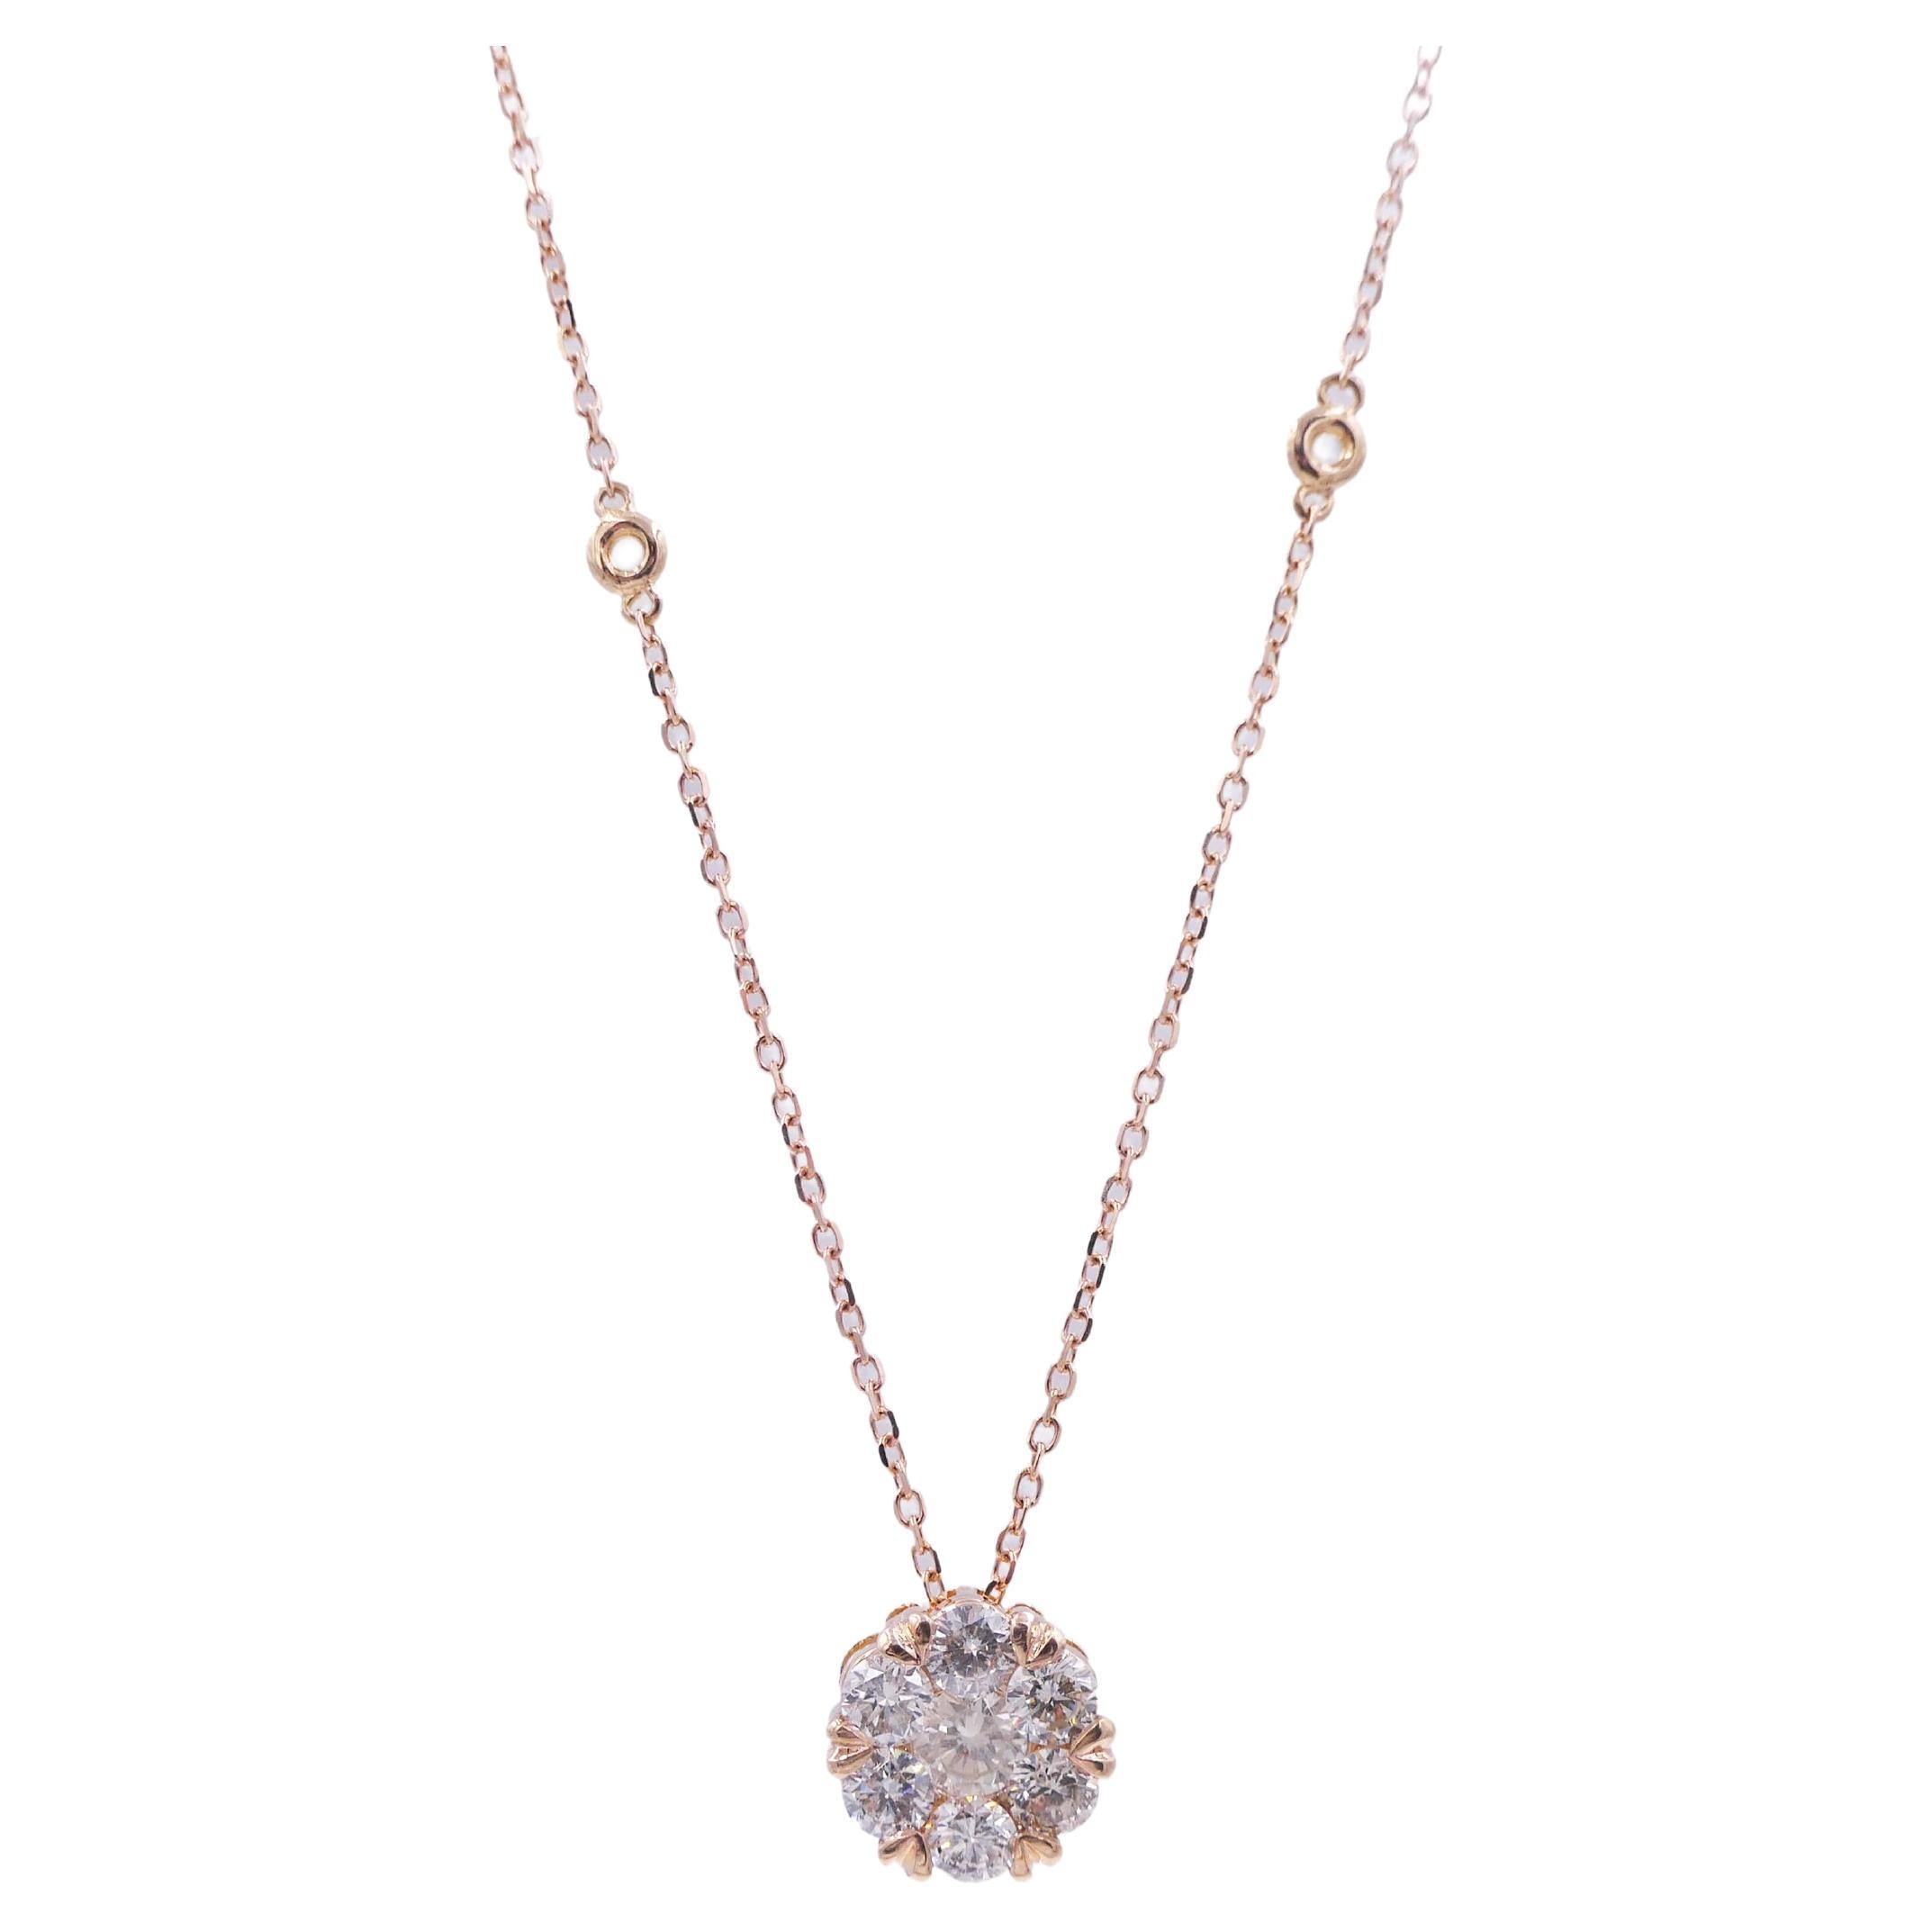 18K Rose Gold 
1.50 cts Diamonds - Center Diamond is Silvery Grey - Other Diamonds are Warm & Brilliant
18-20 inches adjustable diamond-cut cable chain